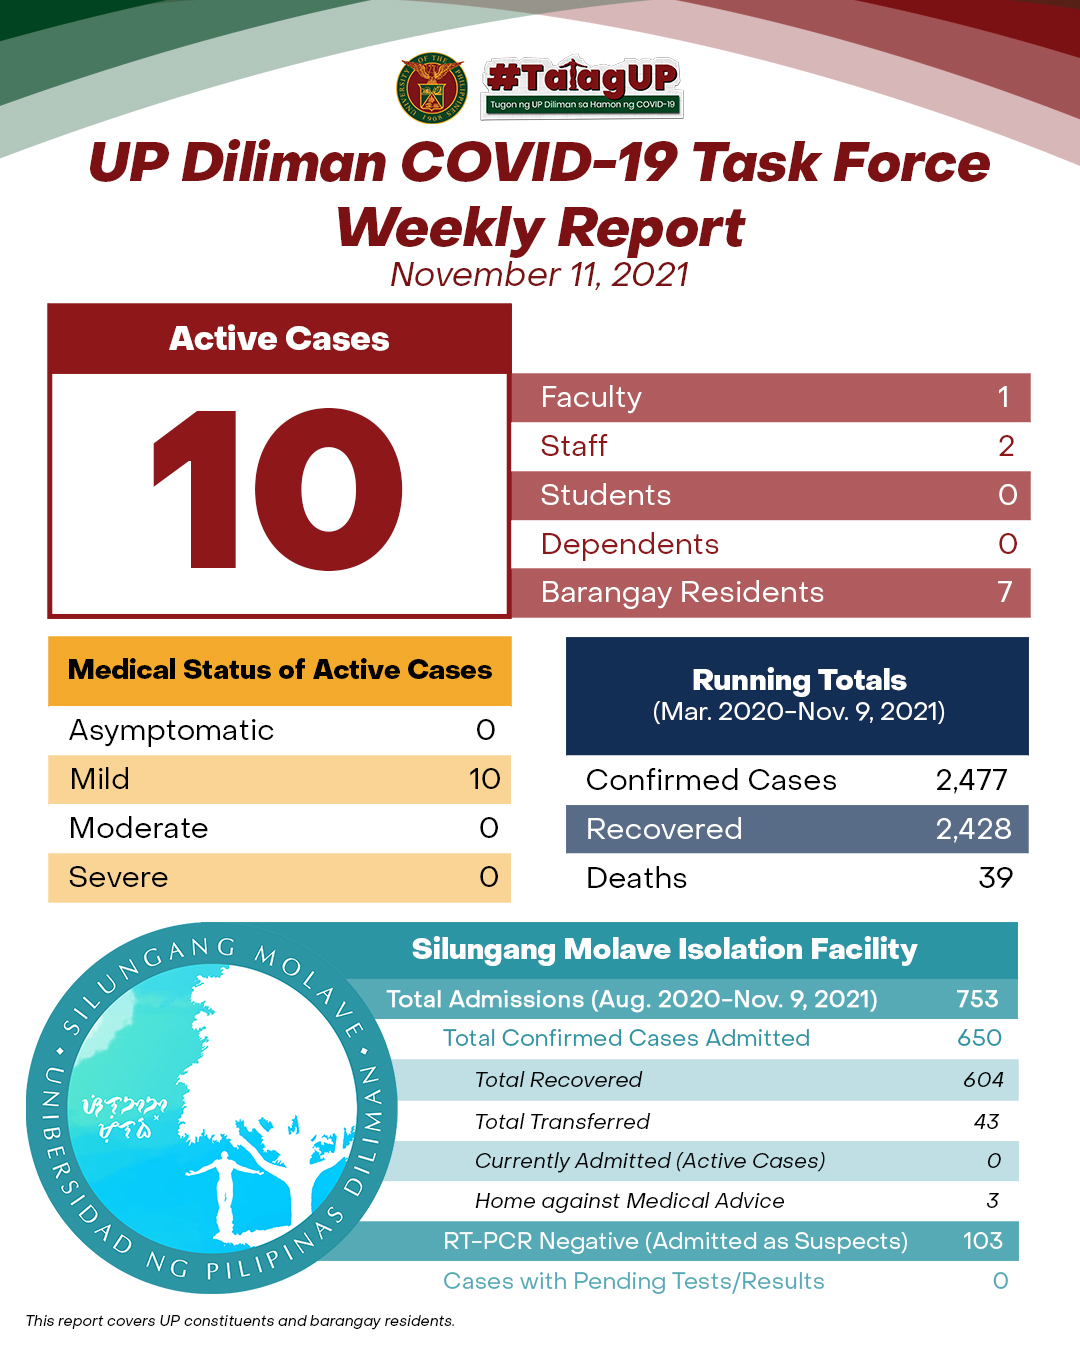 UP Diliman COVID-19 Task Force Weekly Report (November 11, 2021)